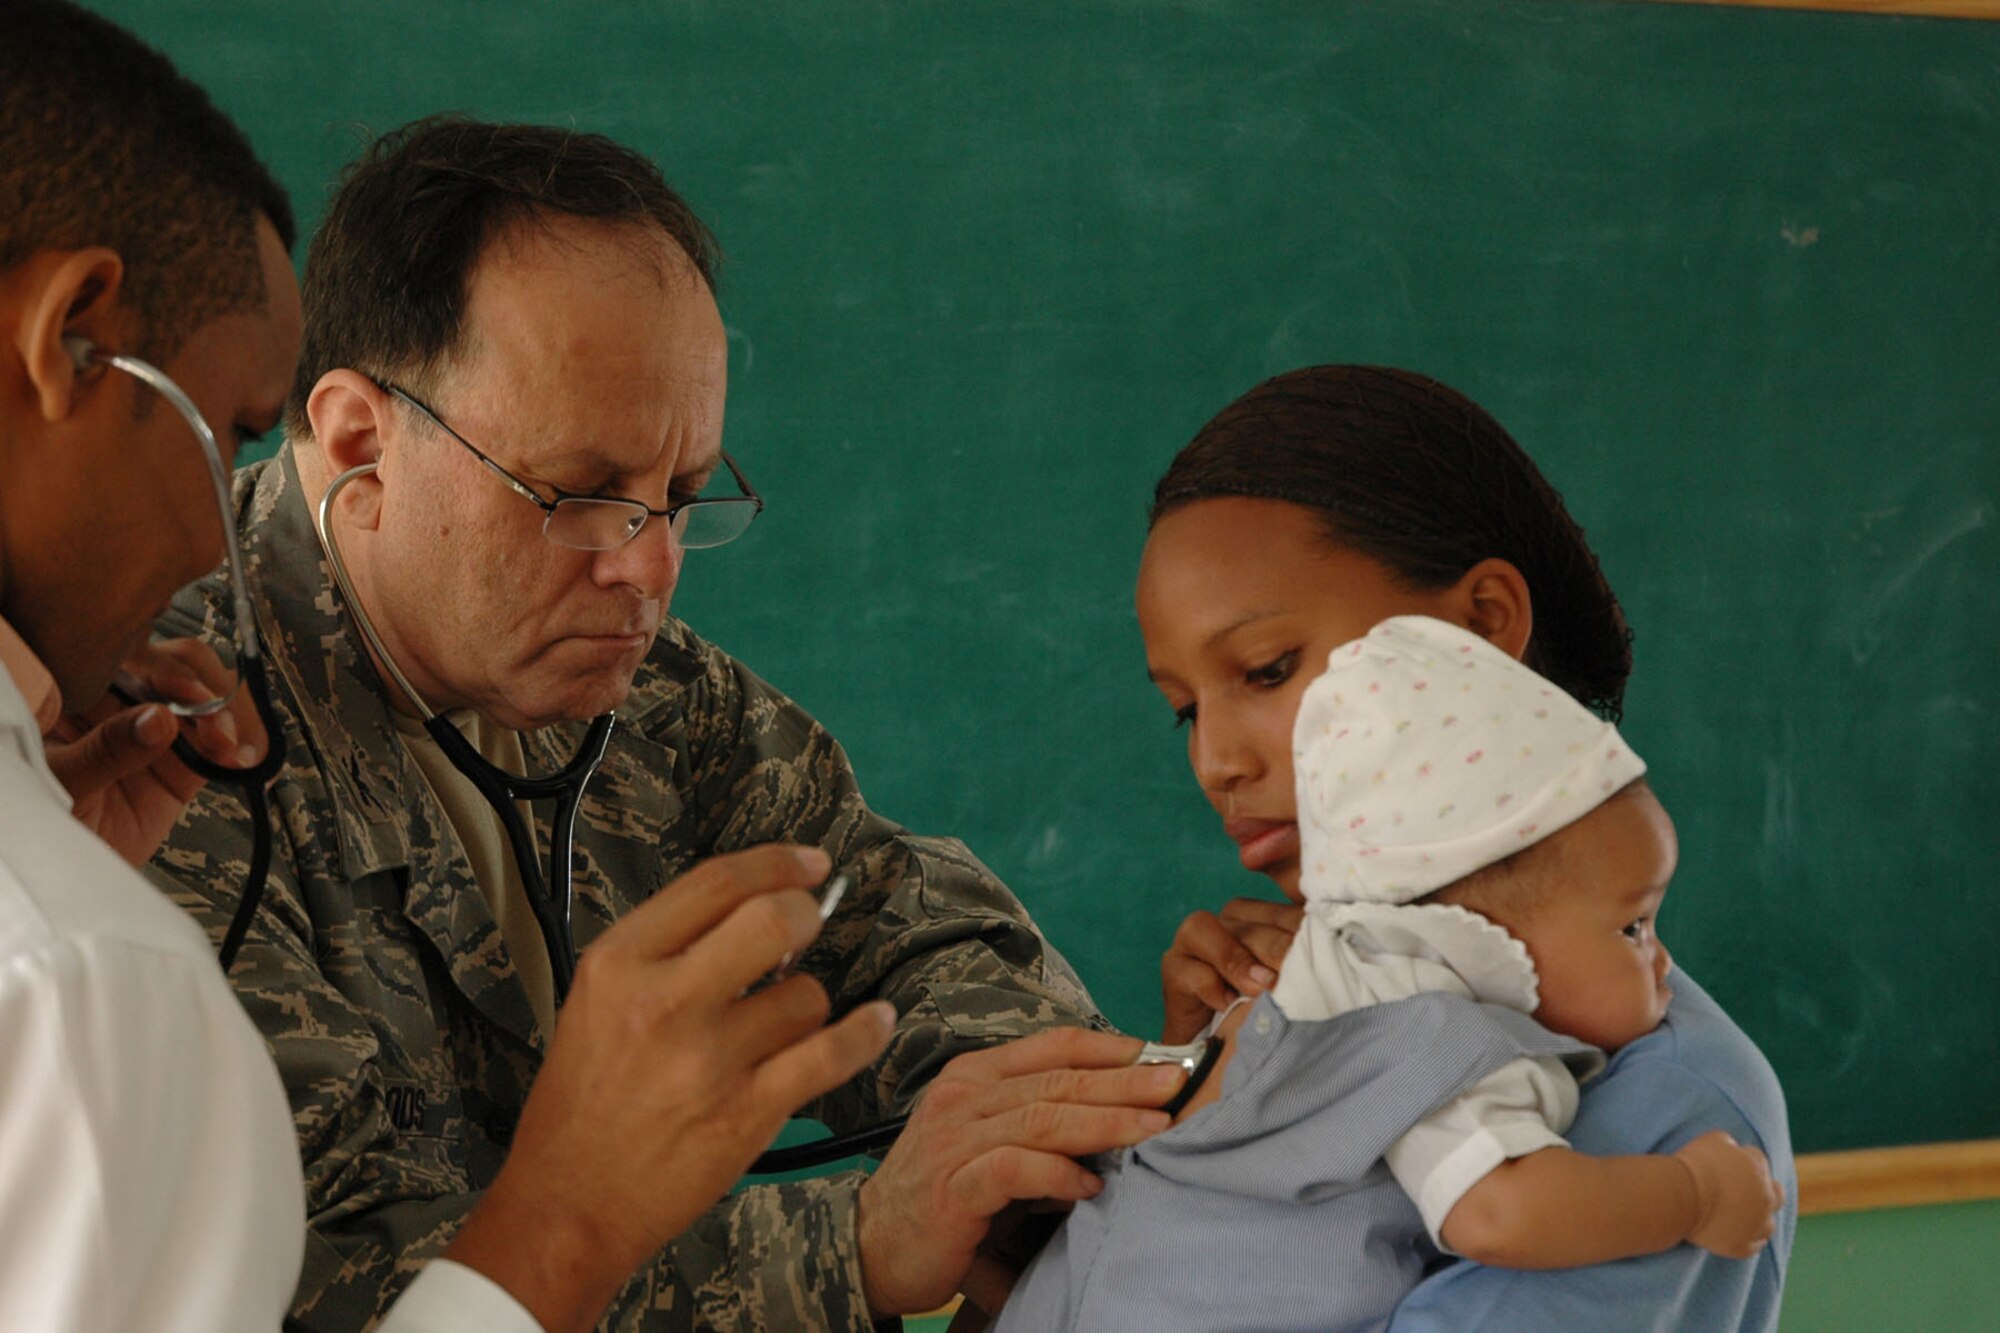 AZUA, Dominican Republic - U.S. Air Force Reservist Col. Larry Woods, assigned to the 910th Medical Squadron, examines a Dominican child in the Family Care section of Dominican Republic Medical Readiness Training Exercise (MEDRETE) here. Col. Woods is a member of a team of more than 30 Citizen Airman providing much needed medical care to more than 10,000 Dominican residents during this mission. The group left Youngstown Air Reserve Station, Ohio on April 25 and is scheduled to return on May 8. (U.S. Air Force photo by Tech. Sgt. Dennis J. Kilker Jr.)